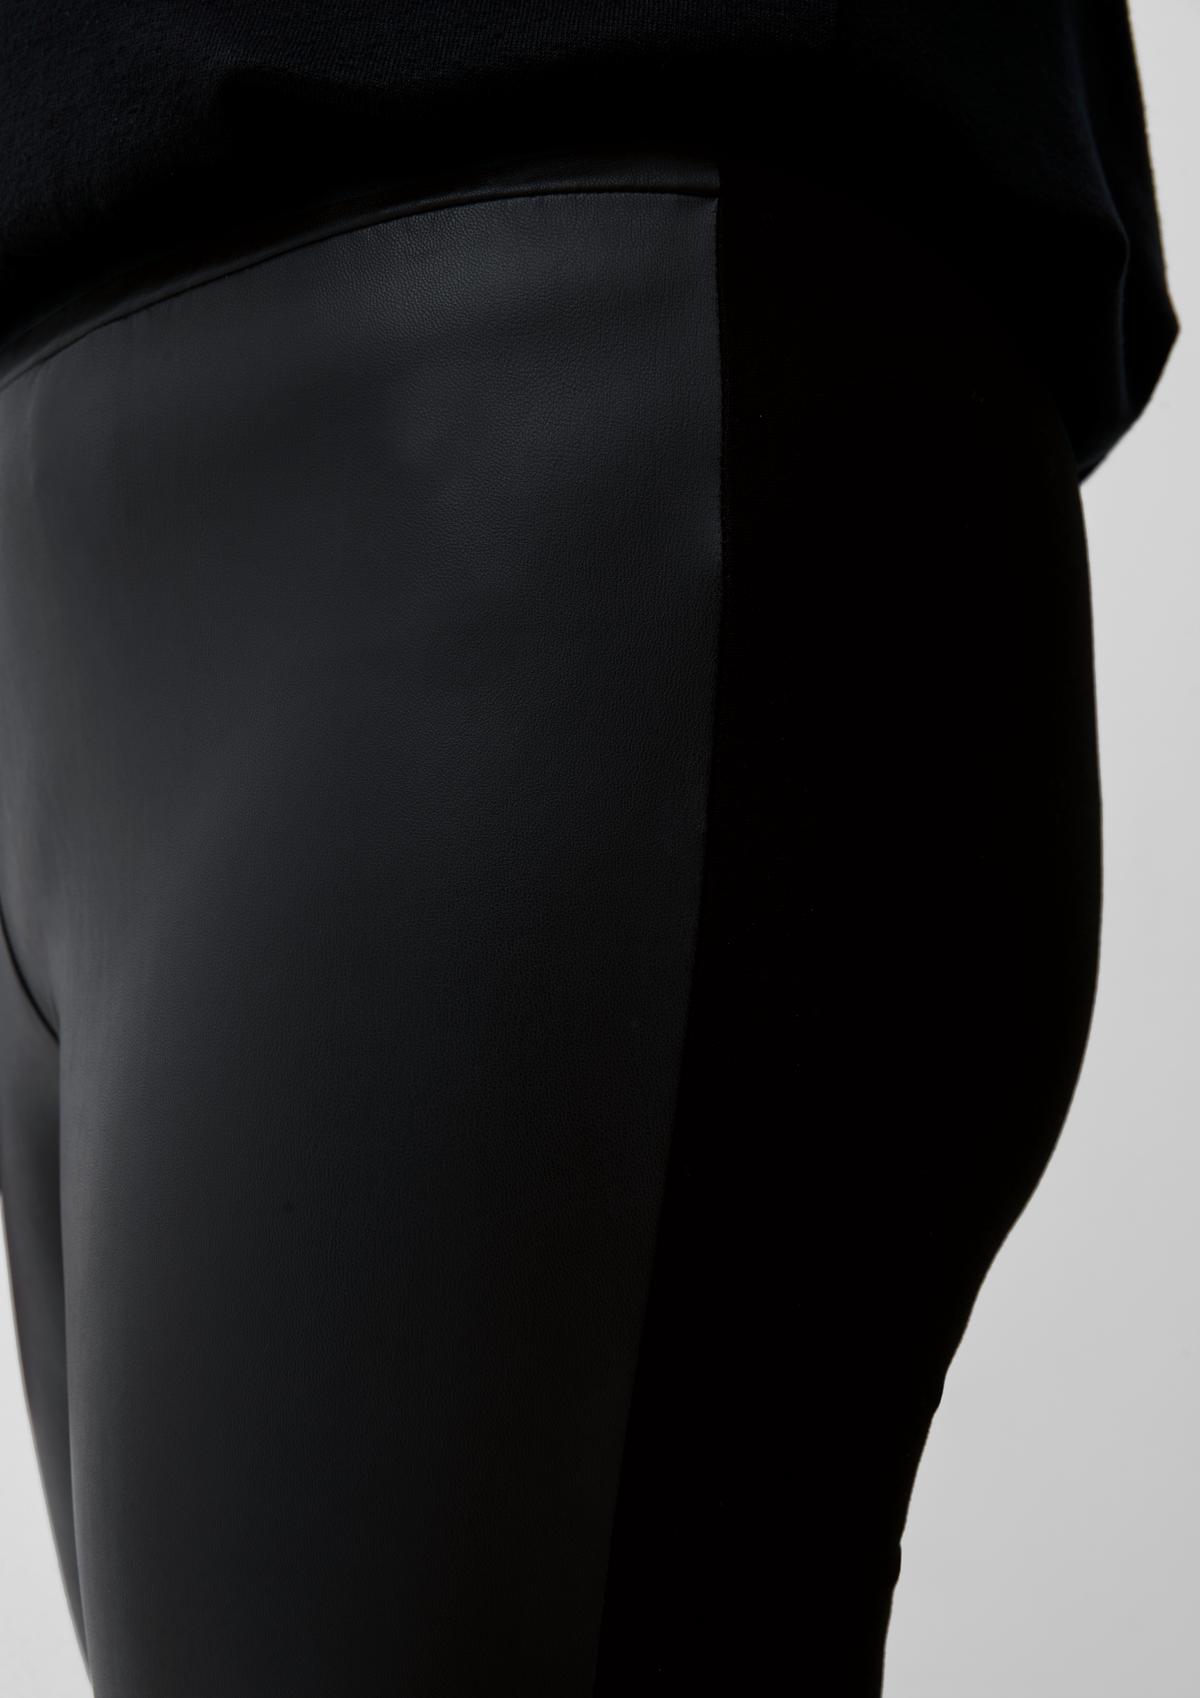 leather-look a - black front Leggings with